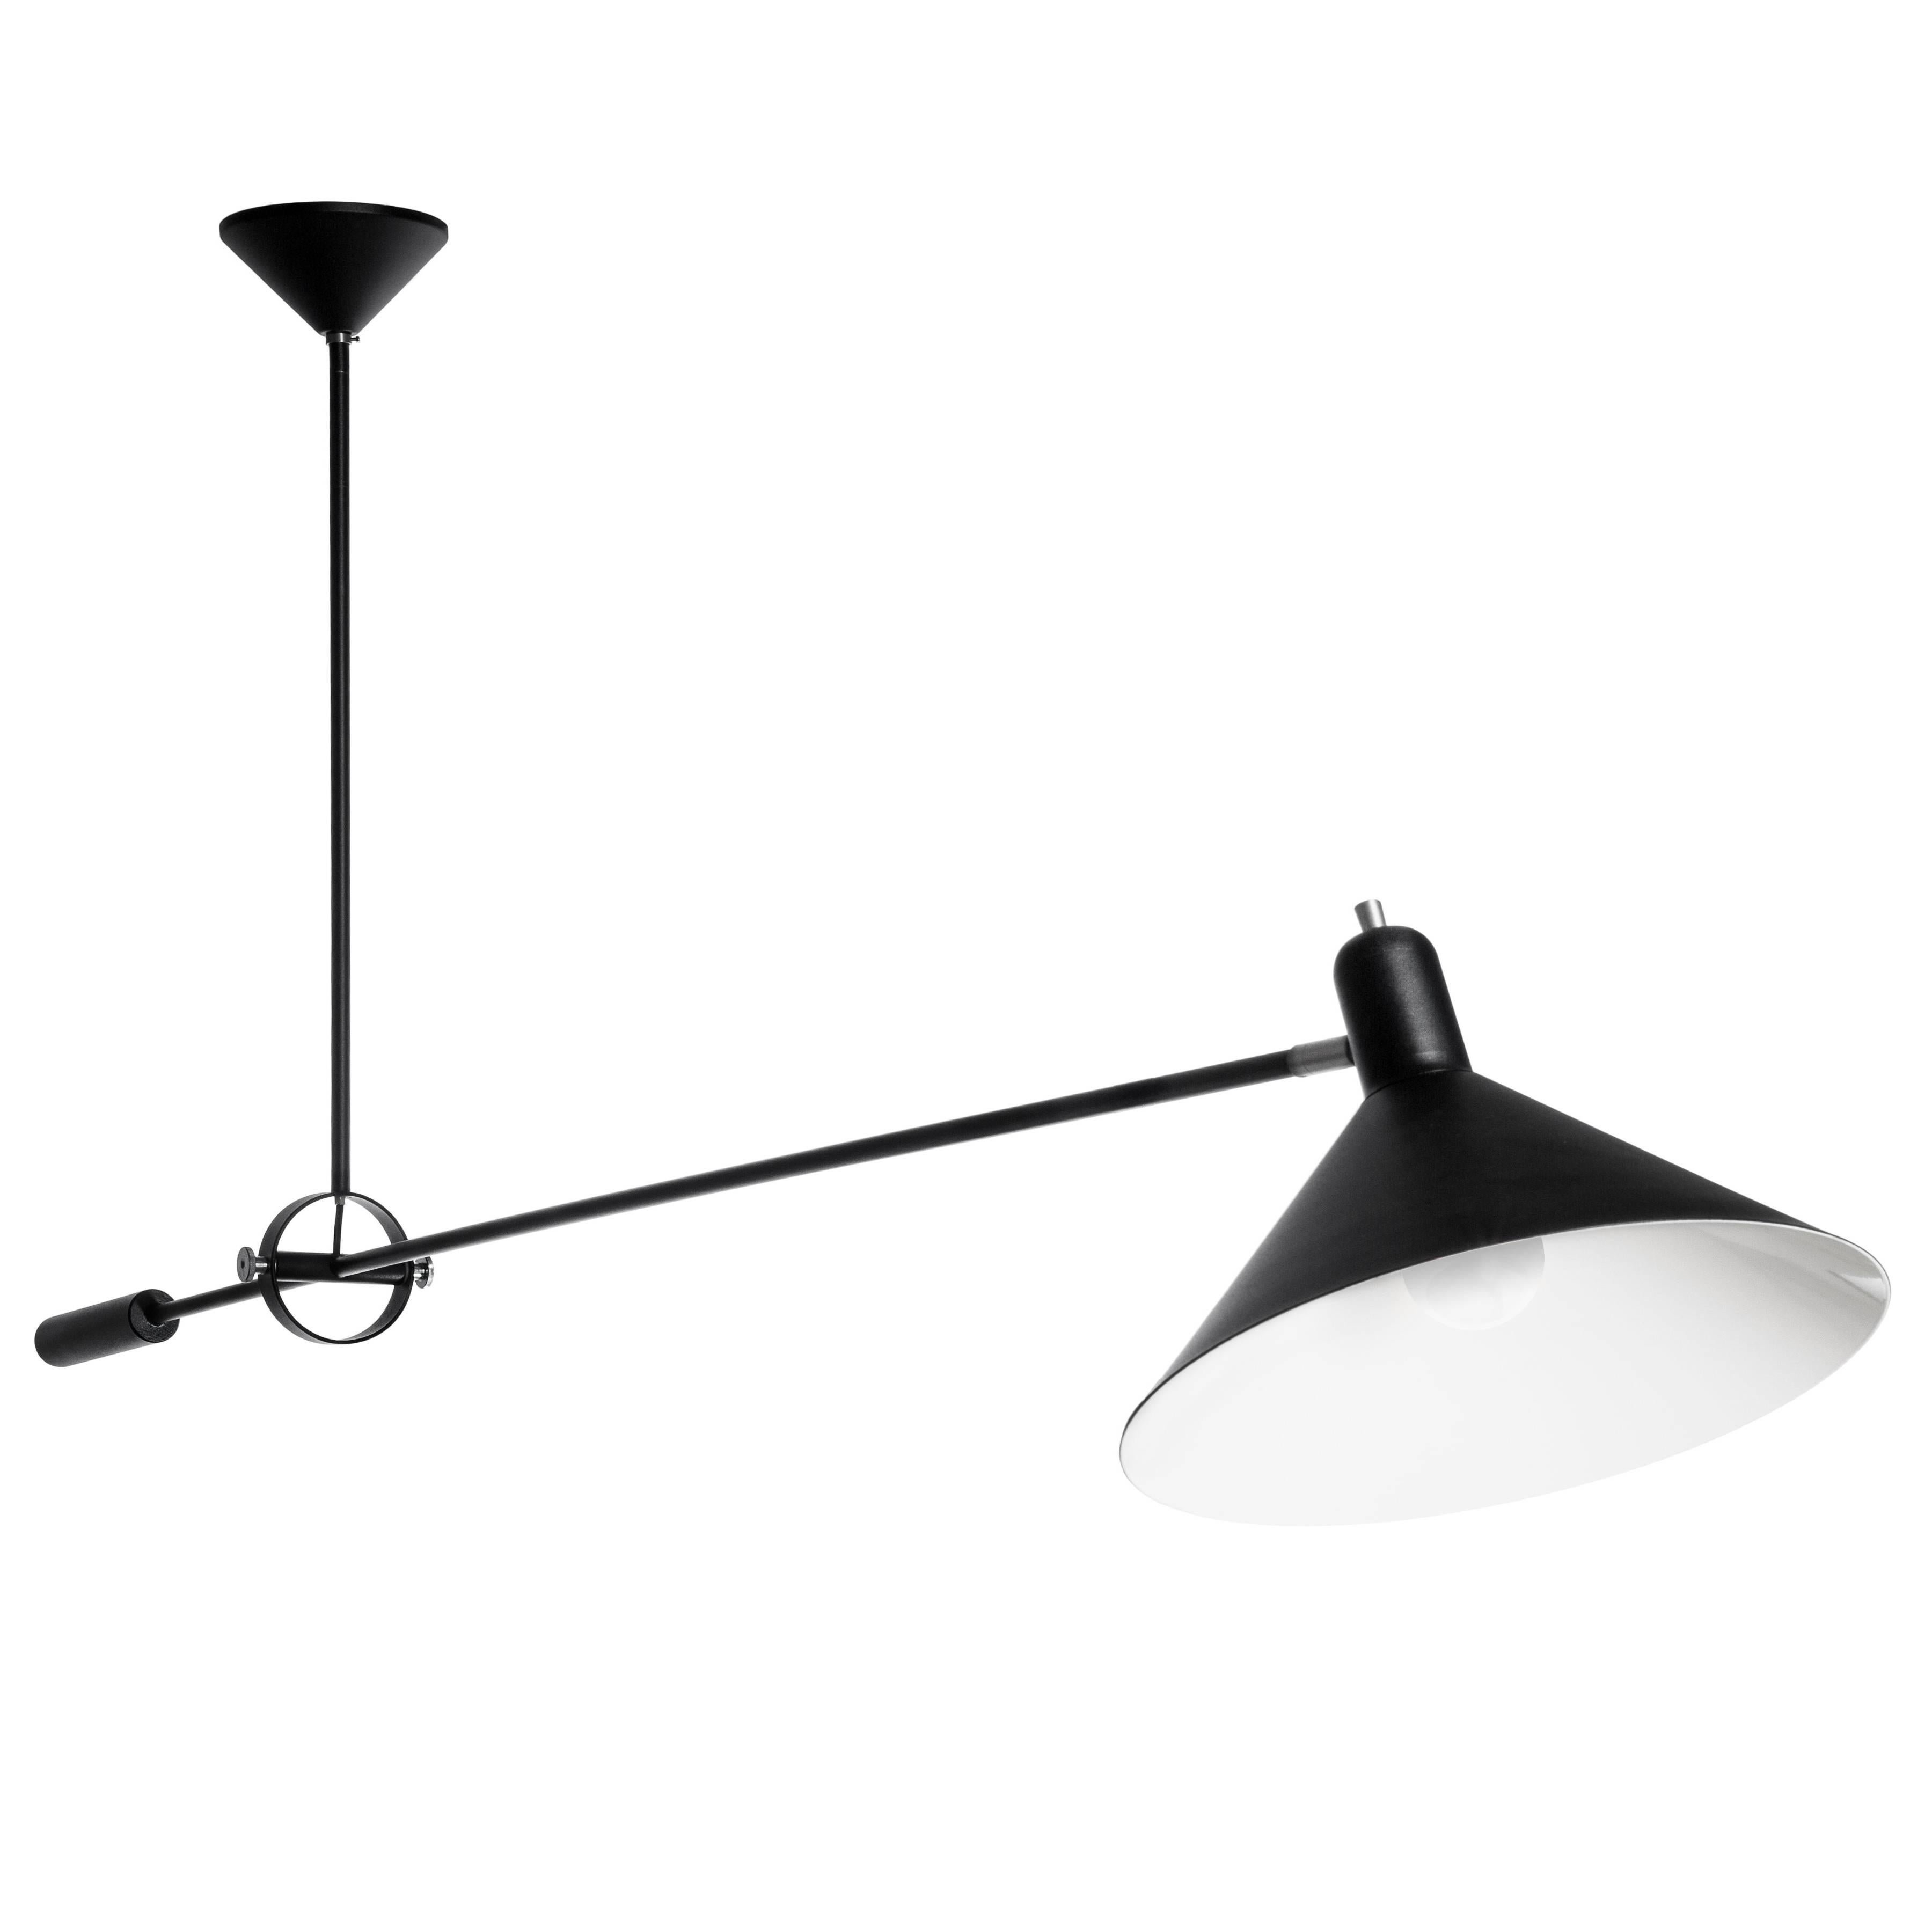 J.J.M. Hoogervorst counterbalance ceiling light in white for Anvia. Hoogervorst's signature light is also one of the most iconic Dutch designs of the midcentury era. Fully adjustable, the aluminum and steel arm can be raised up or down and rotated